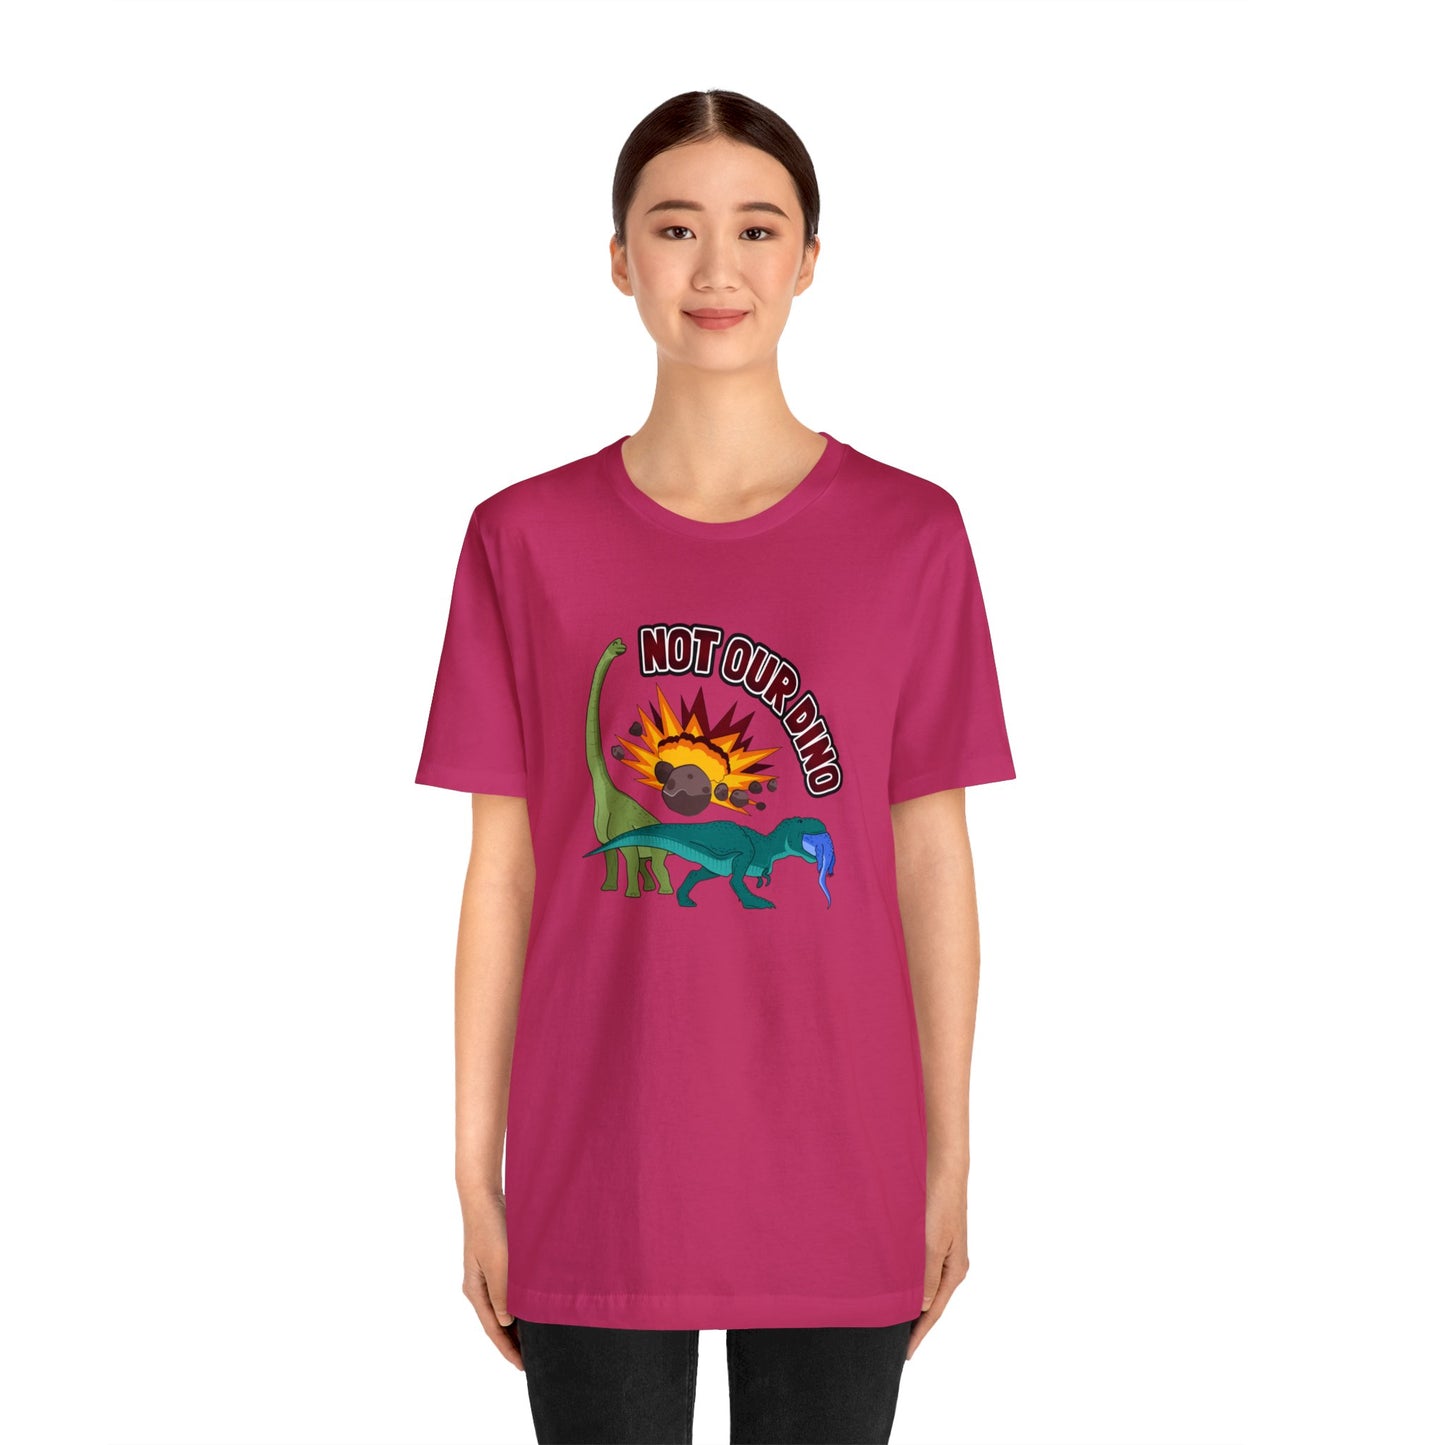 Not Our Dino Unisex Graphic Tee